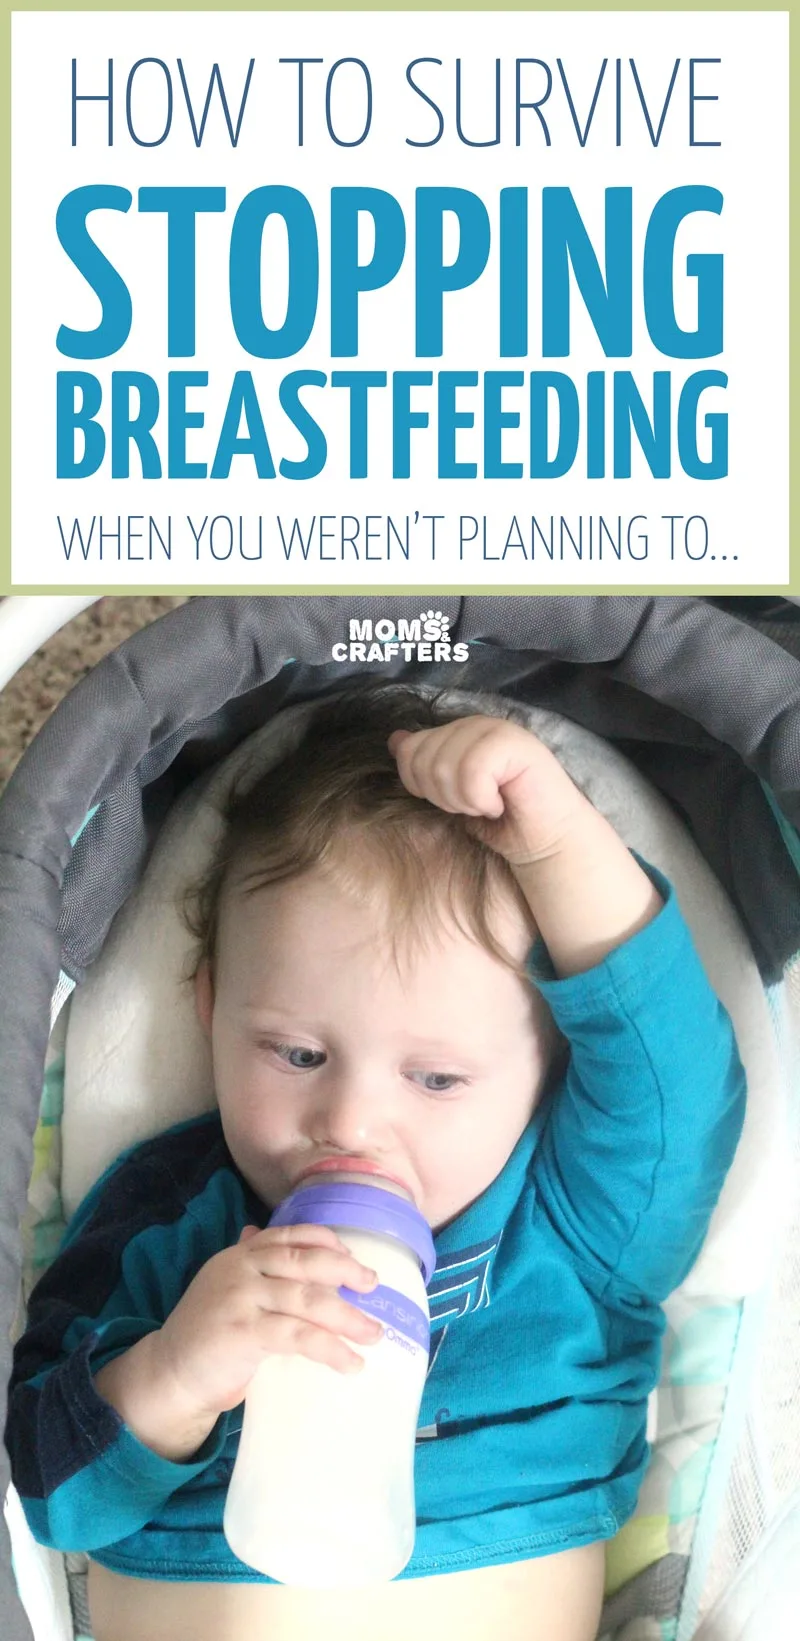 If you're struggling with stopping breastfeeding, read these parenting tips to help you get over the emotional disconnect you might feel. These mom to mom tips and solutions will help you when you decide to stop nursing your baby.